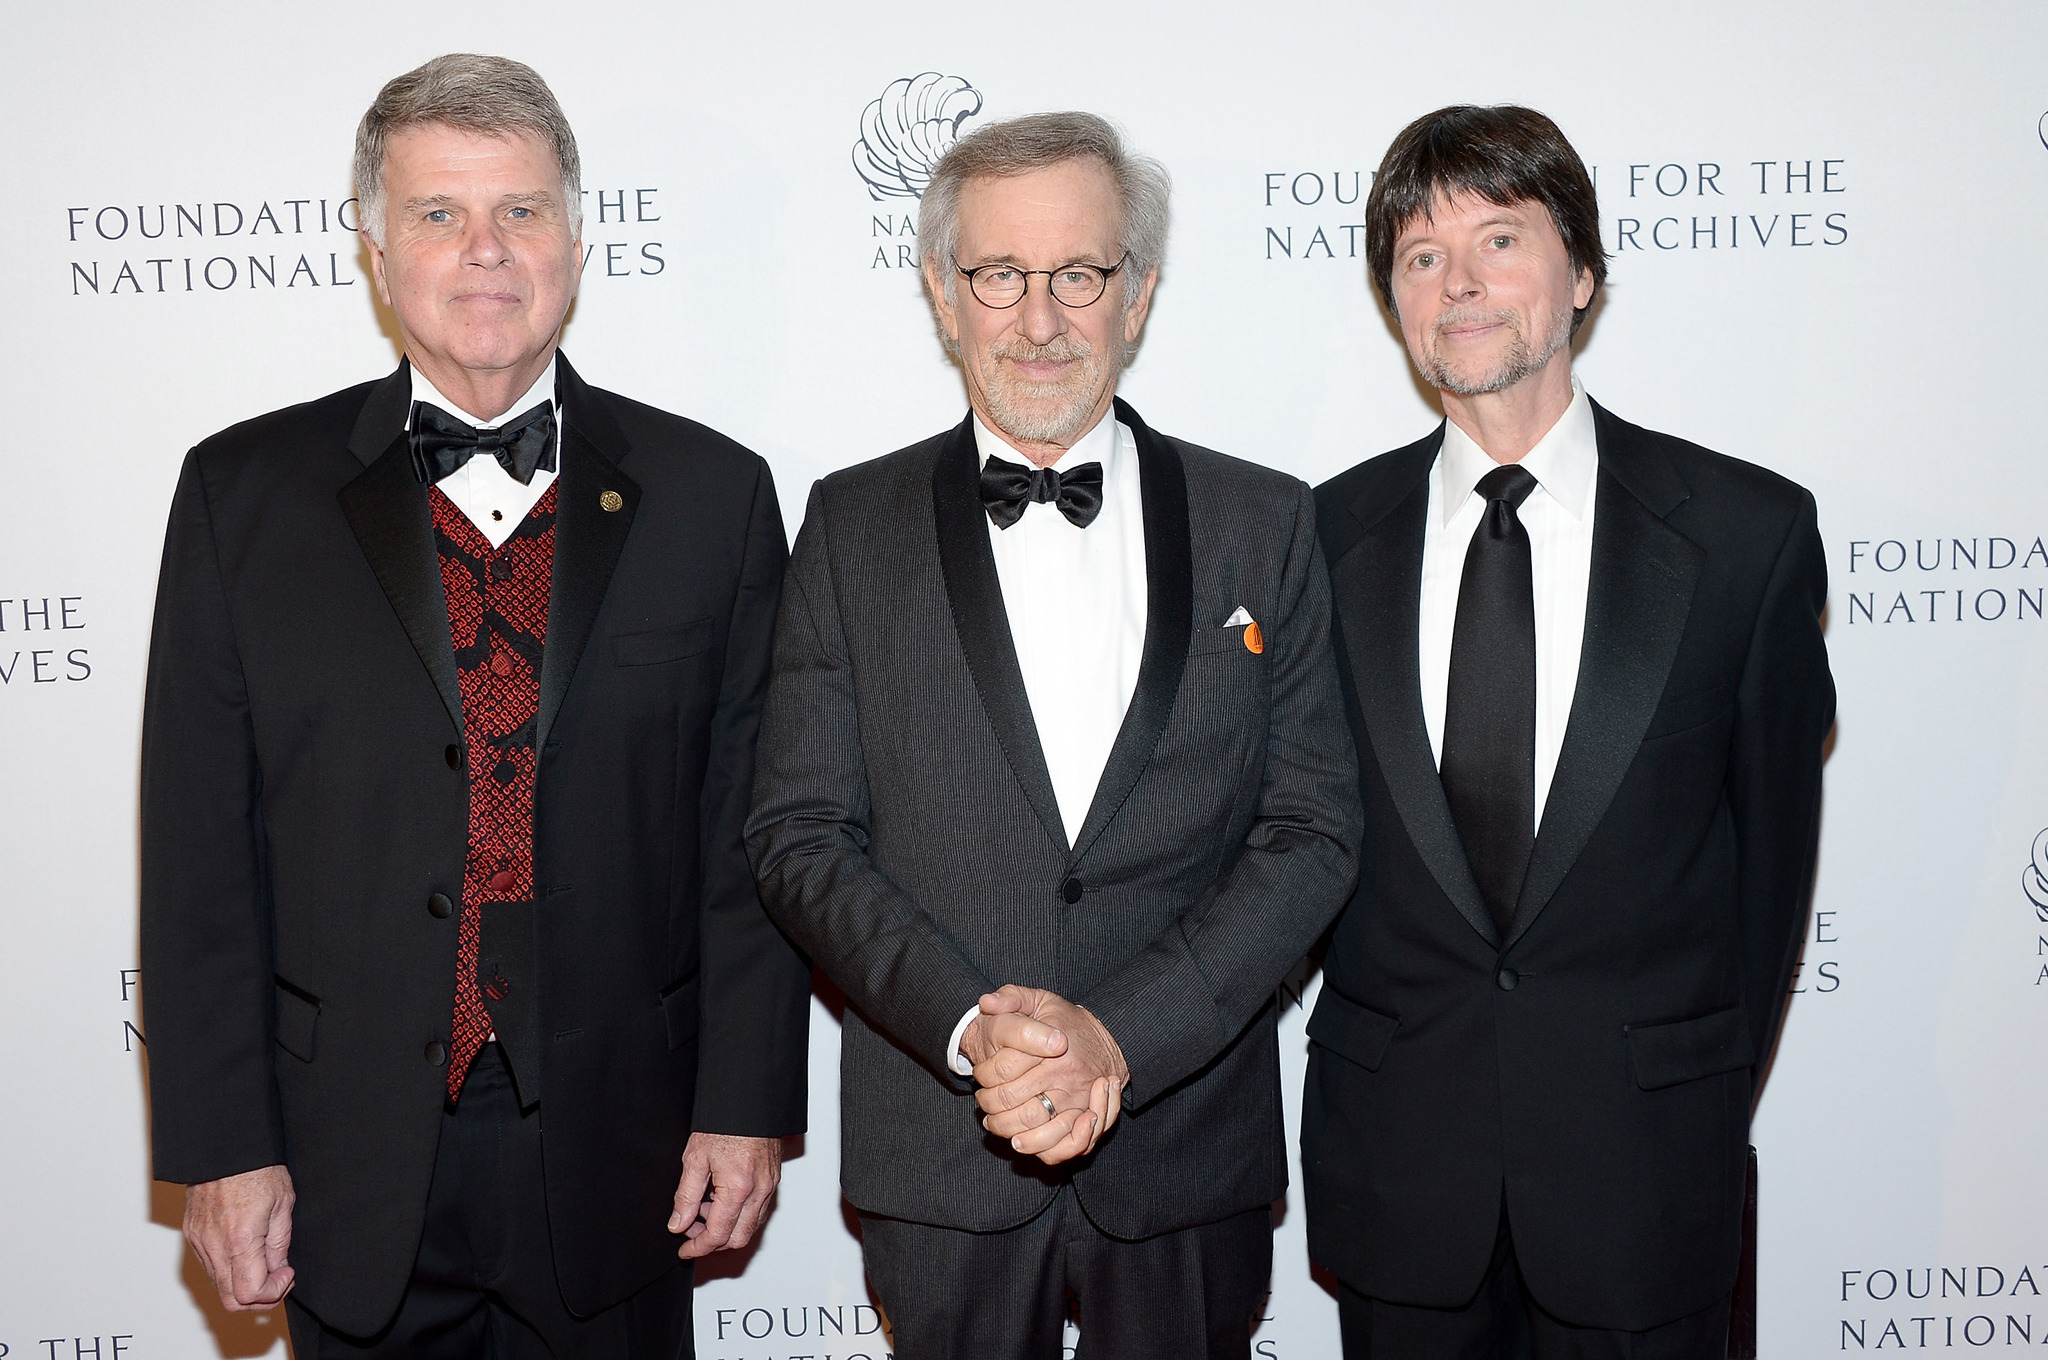 Archivist of the United States The Honorable David S. Ferriero, filmmaker and honoree Steven Spielberg, and Foundation for the National Archives Board Vice President and Gala Chair Ken Burns attend the Foundation for the National Archives 2013 Records of Achievement award ceremony and gala in honor of Steven Spielberg on November 19, 2013 in Washington, D.C.